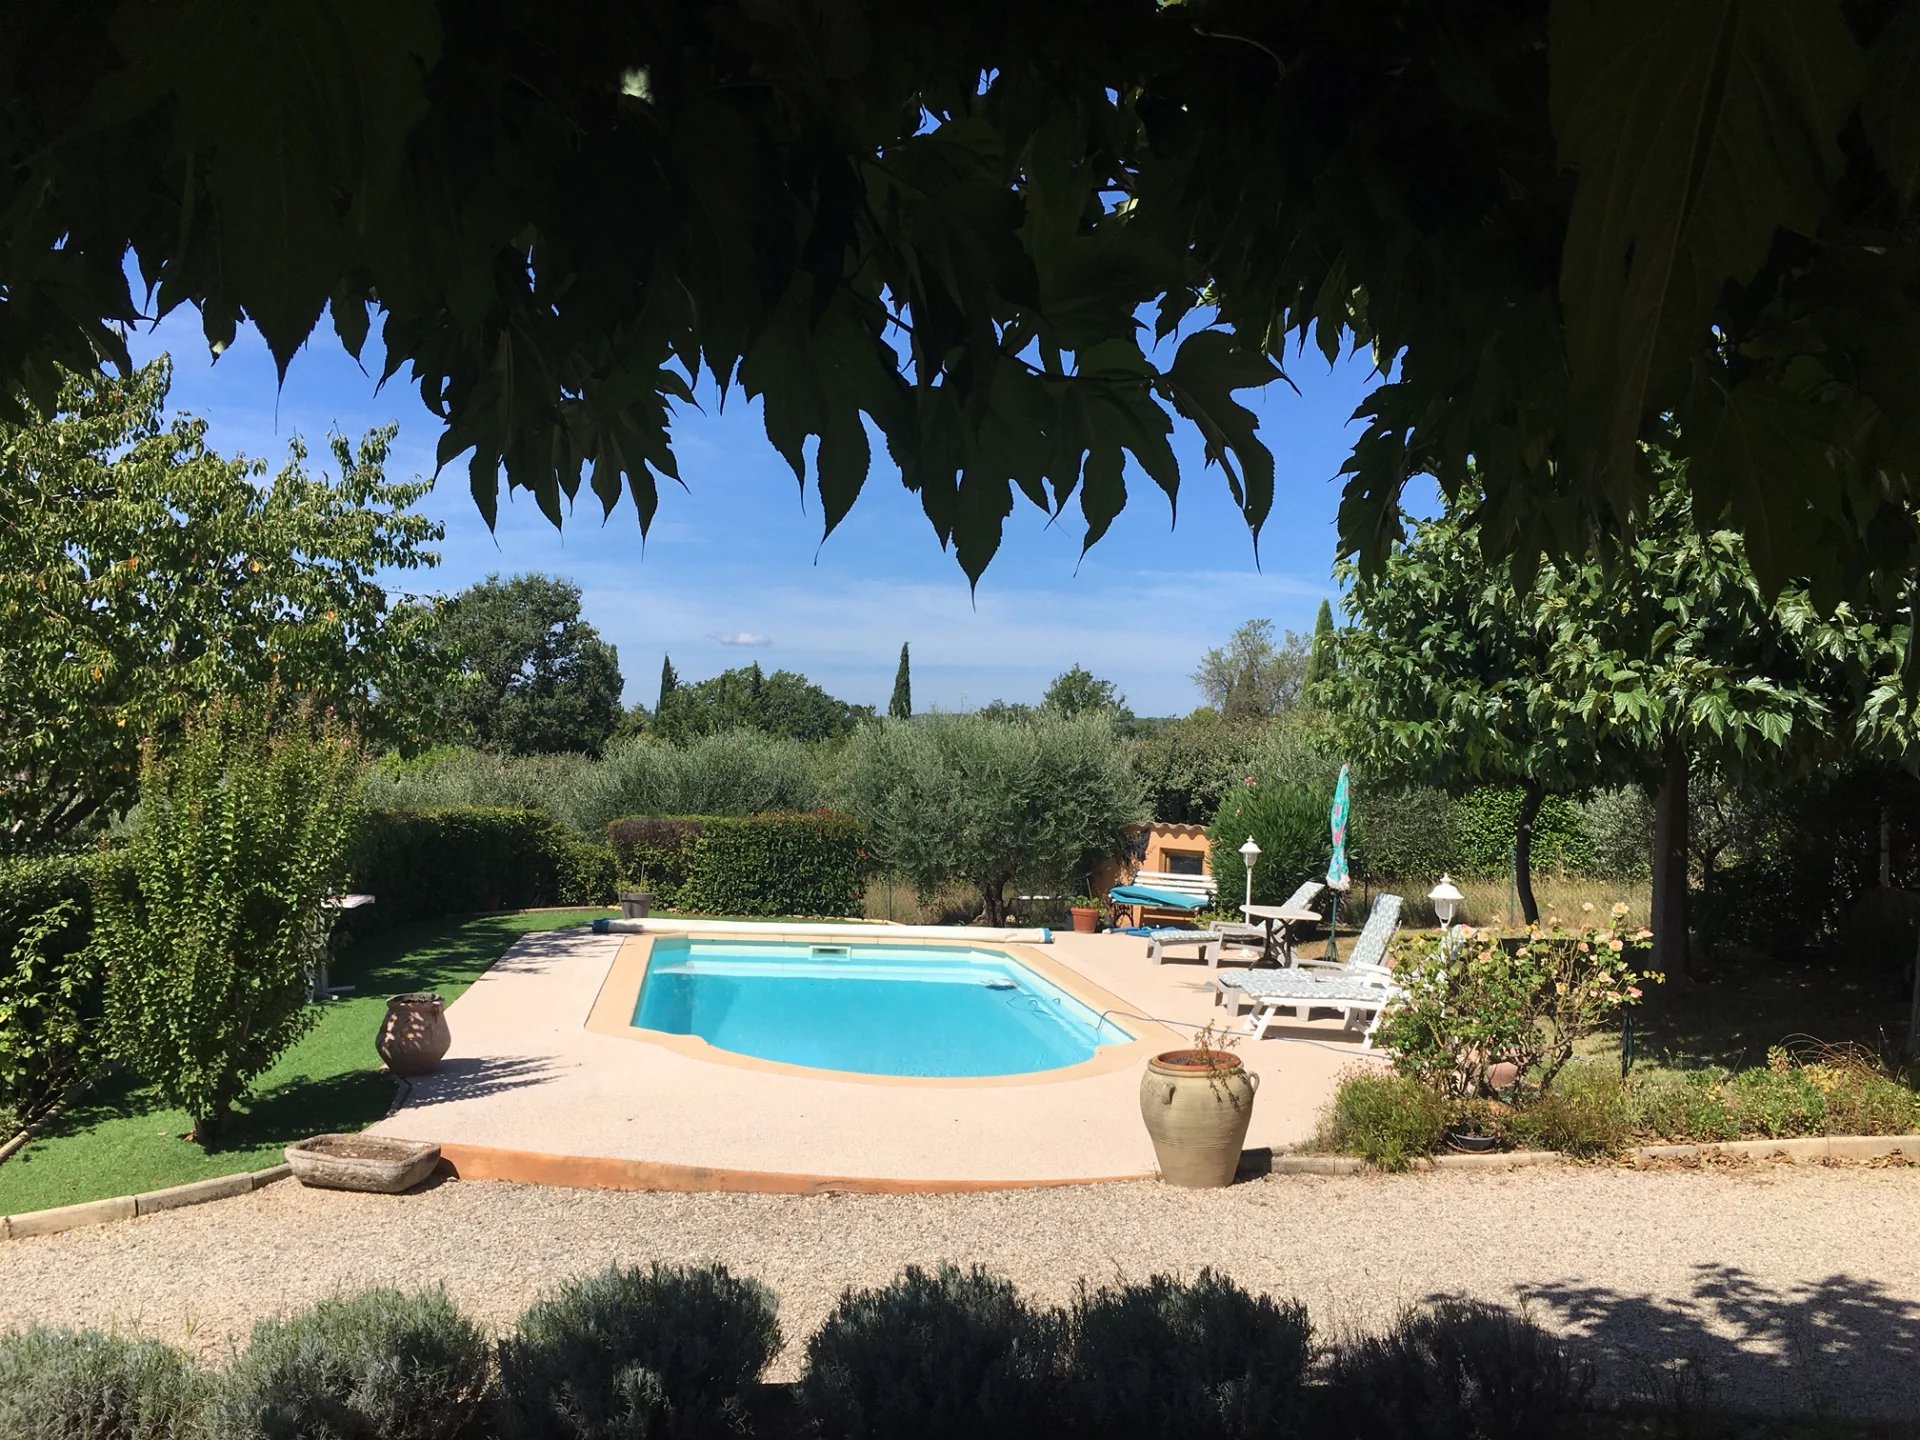 PROVENCALE STYLE VILLA IN OLIVE GROVES